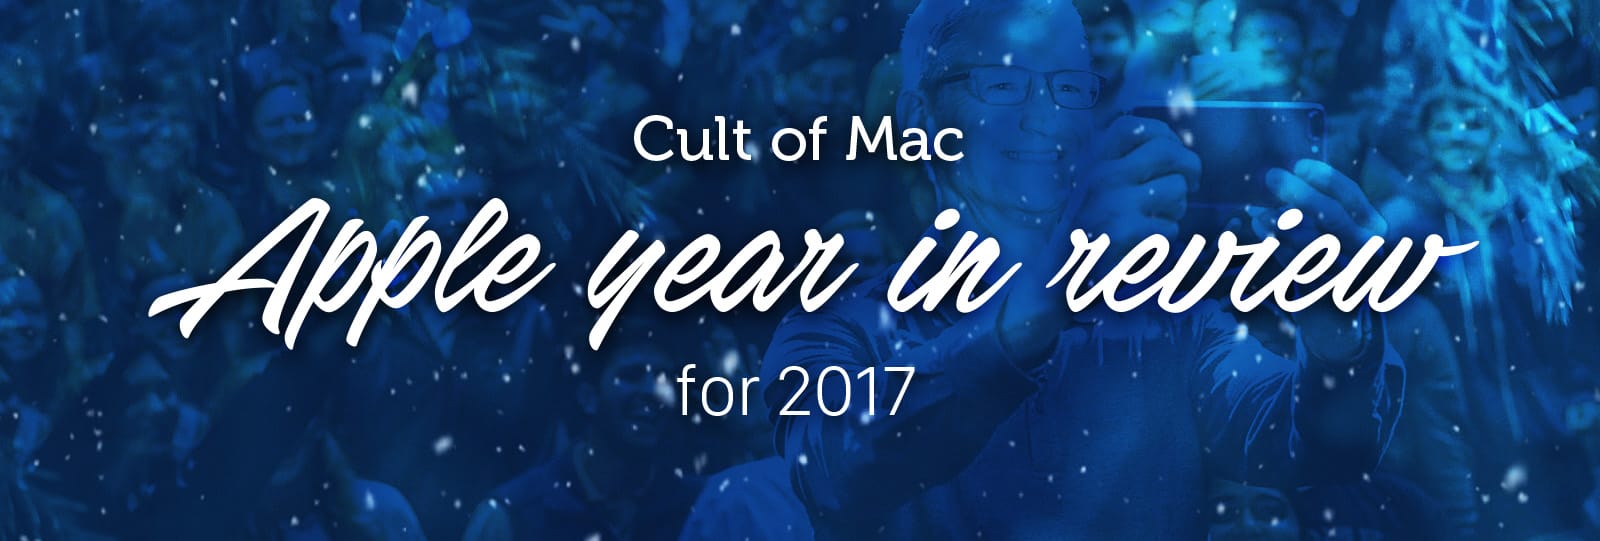 Apple year in review 2017